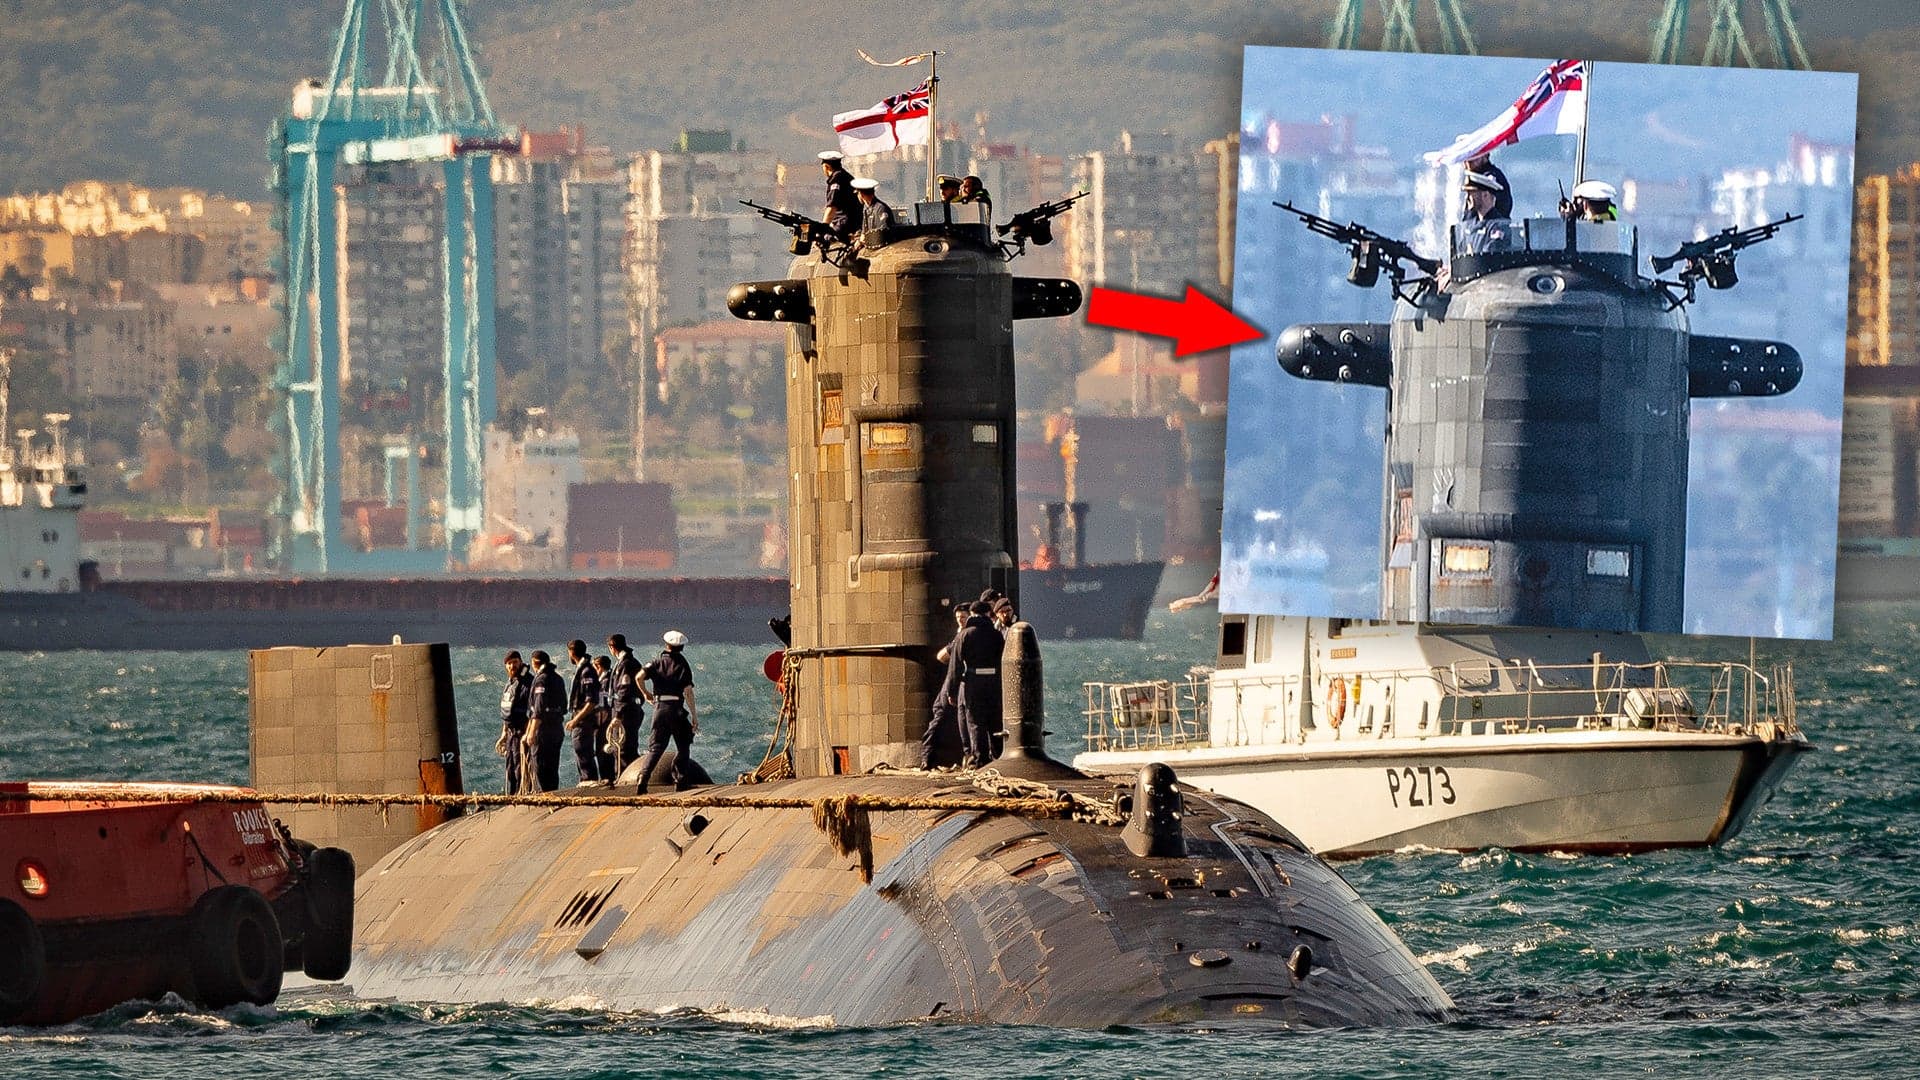 Royal Navy Submarine Appears In Gibraltar Equipped With Enhanced Wake Detection System